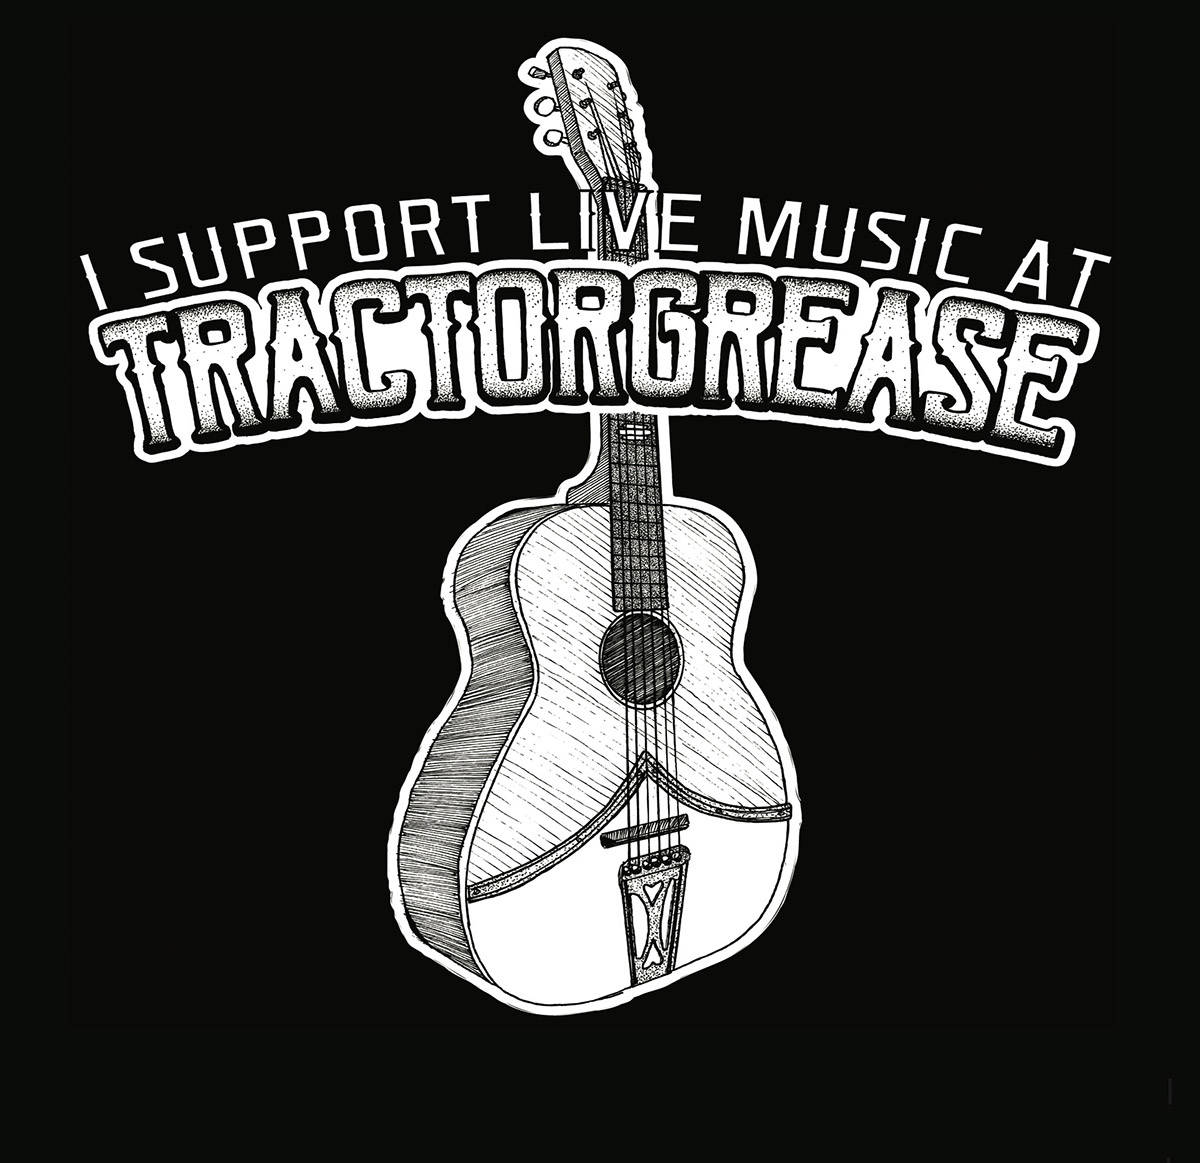 17336119_web1_TractorgreaseCompilation